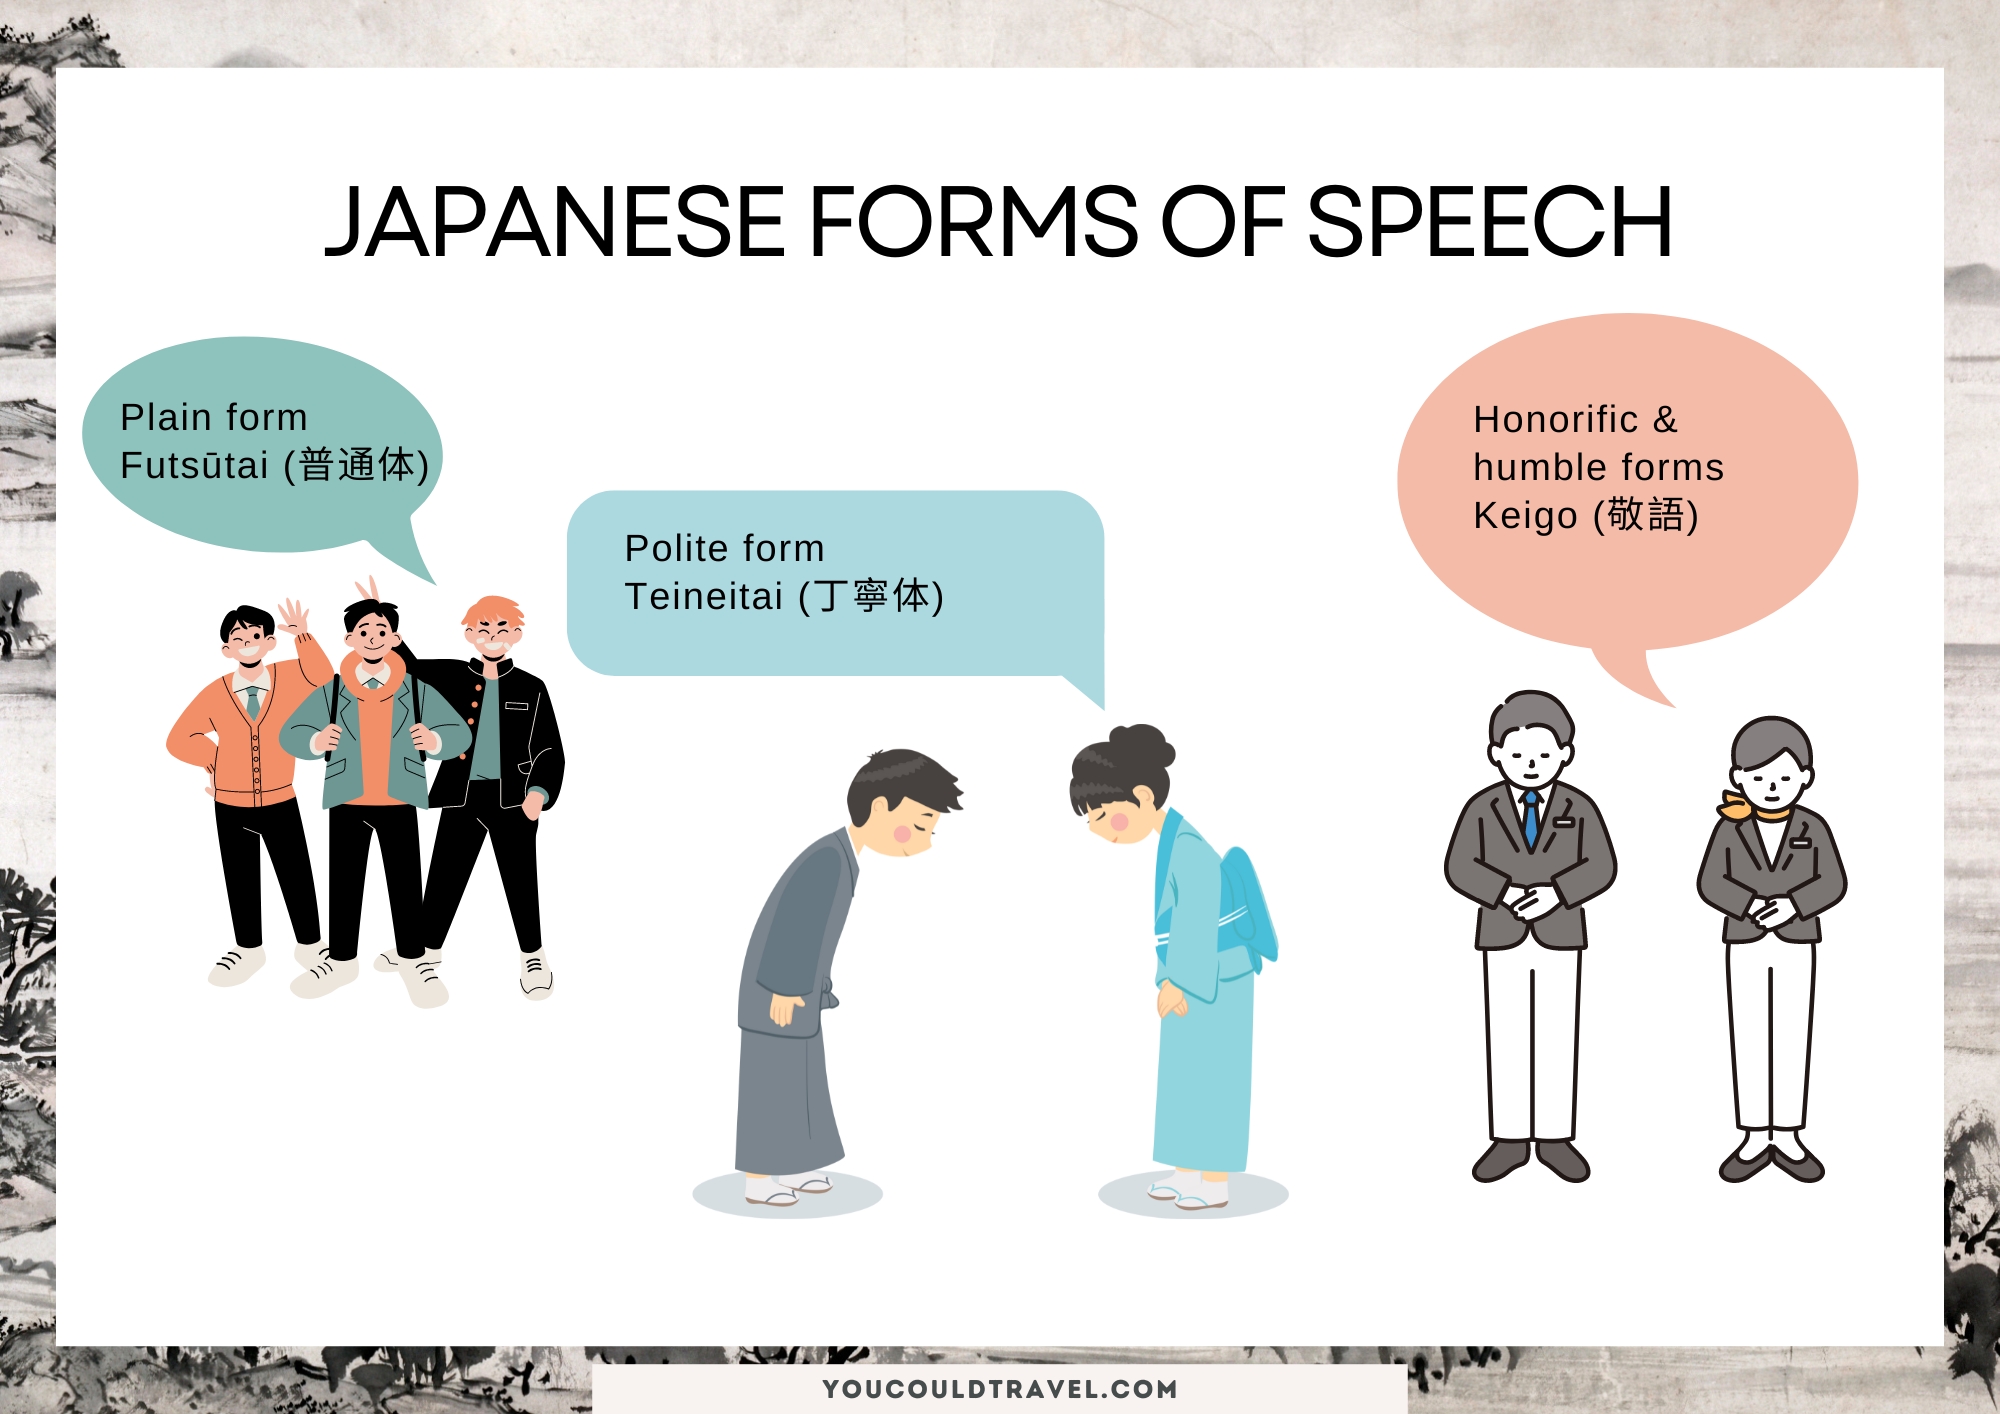 Japanese forms of speech